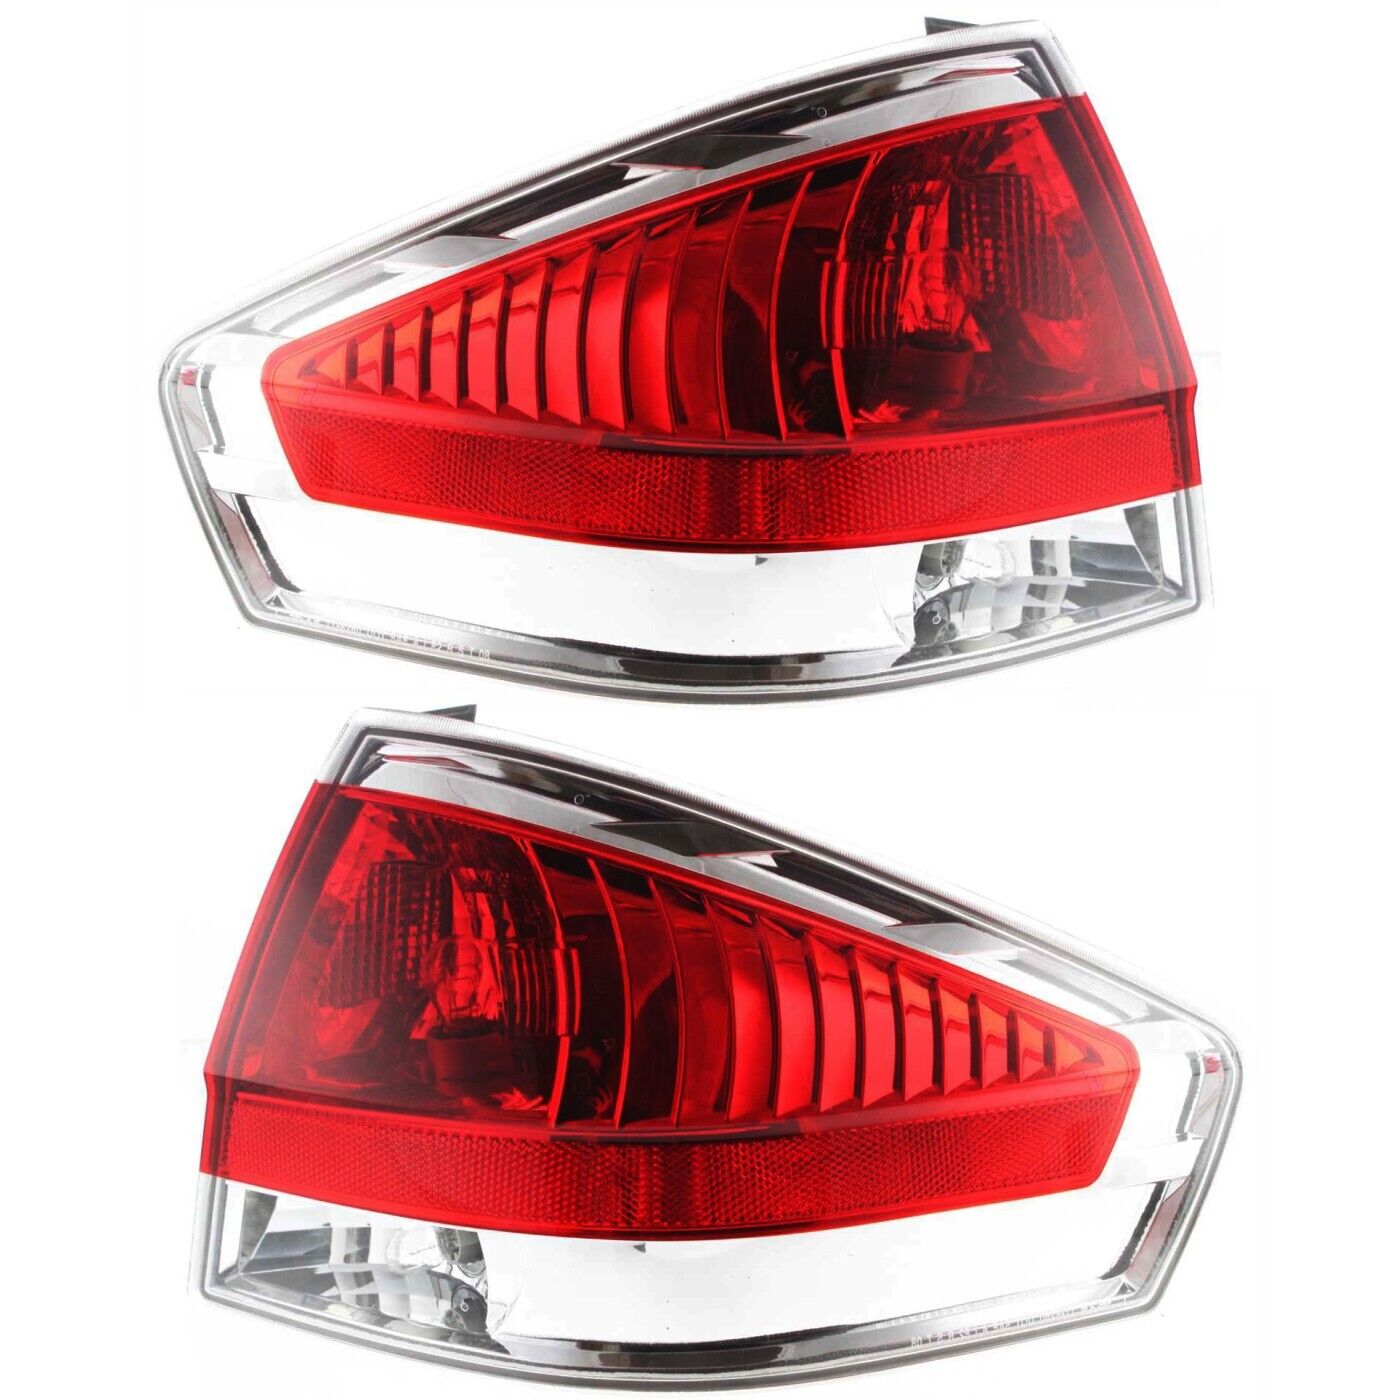 Halogen Tail Light Set For 2008 Ford Focus Clear & Red Lens w/ Bulbs 2Pcs